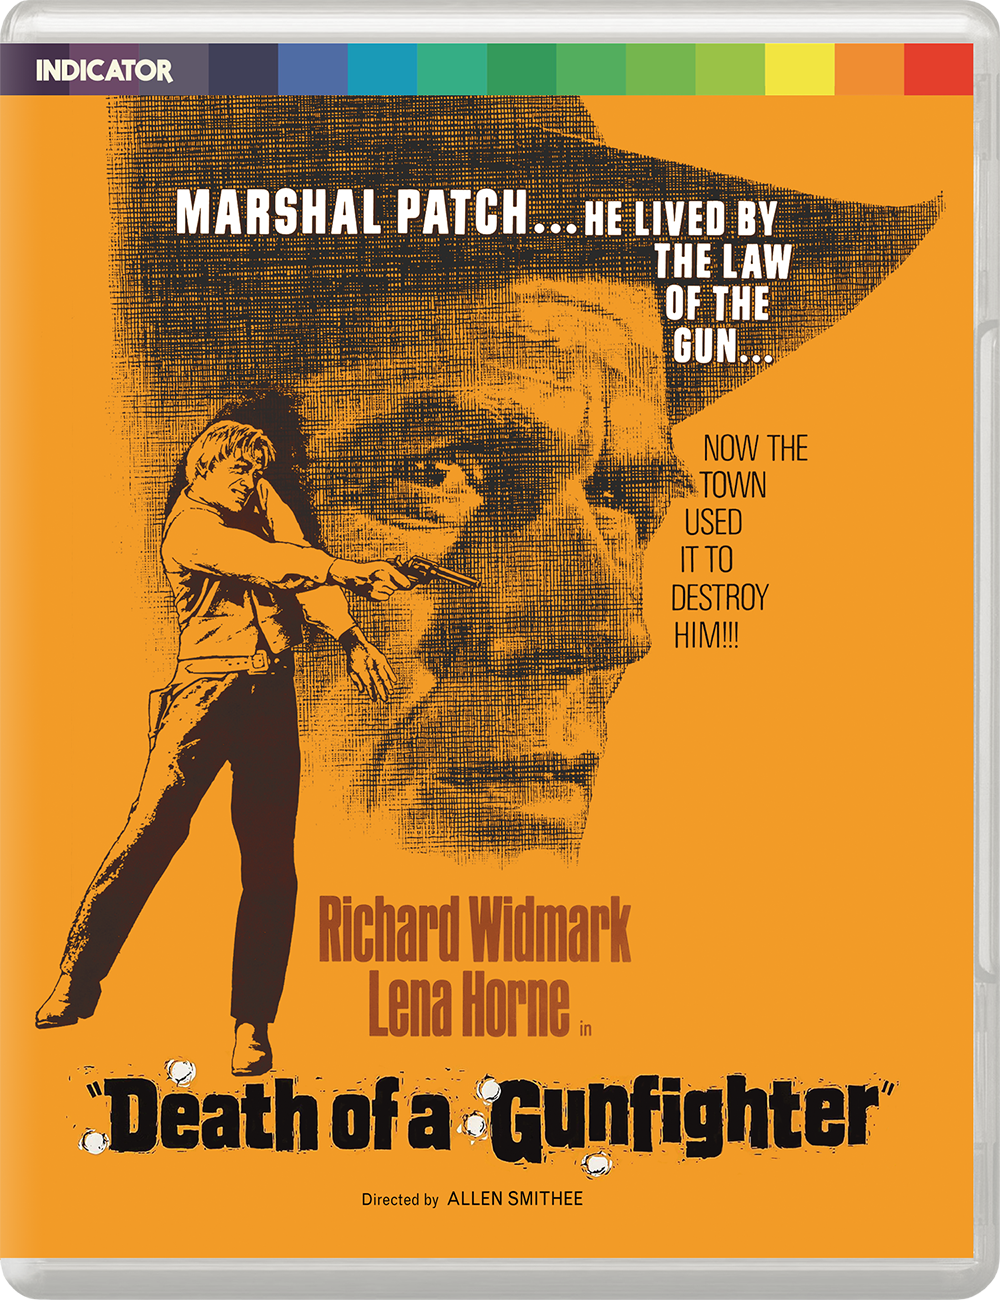 DEATH OF A GUNFIGHTER - LE